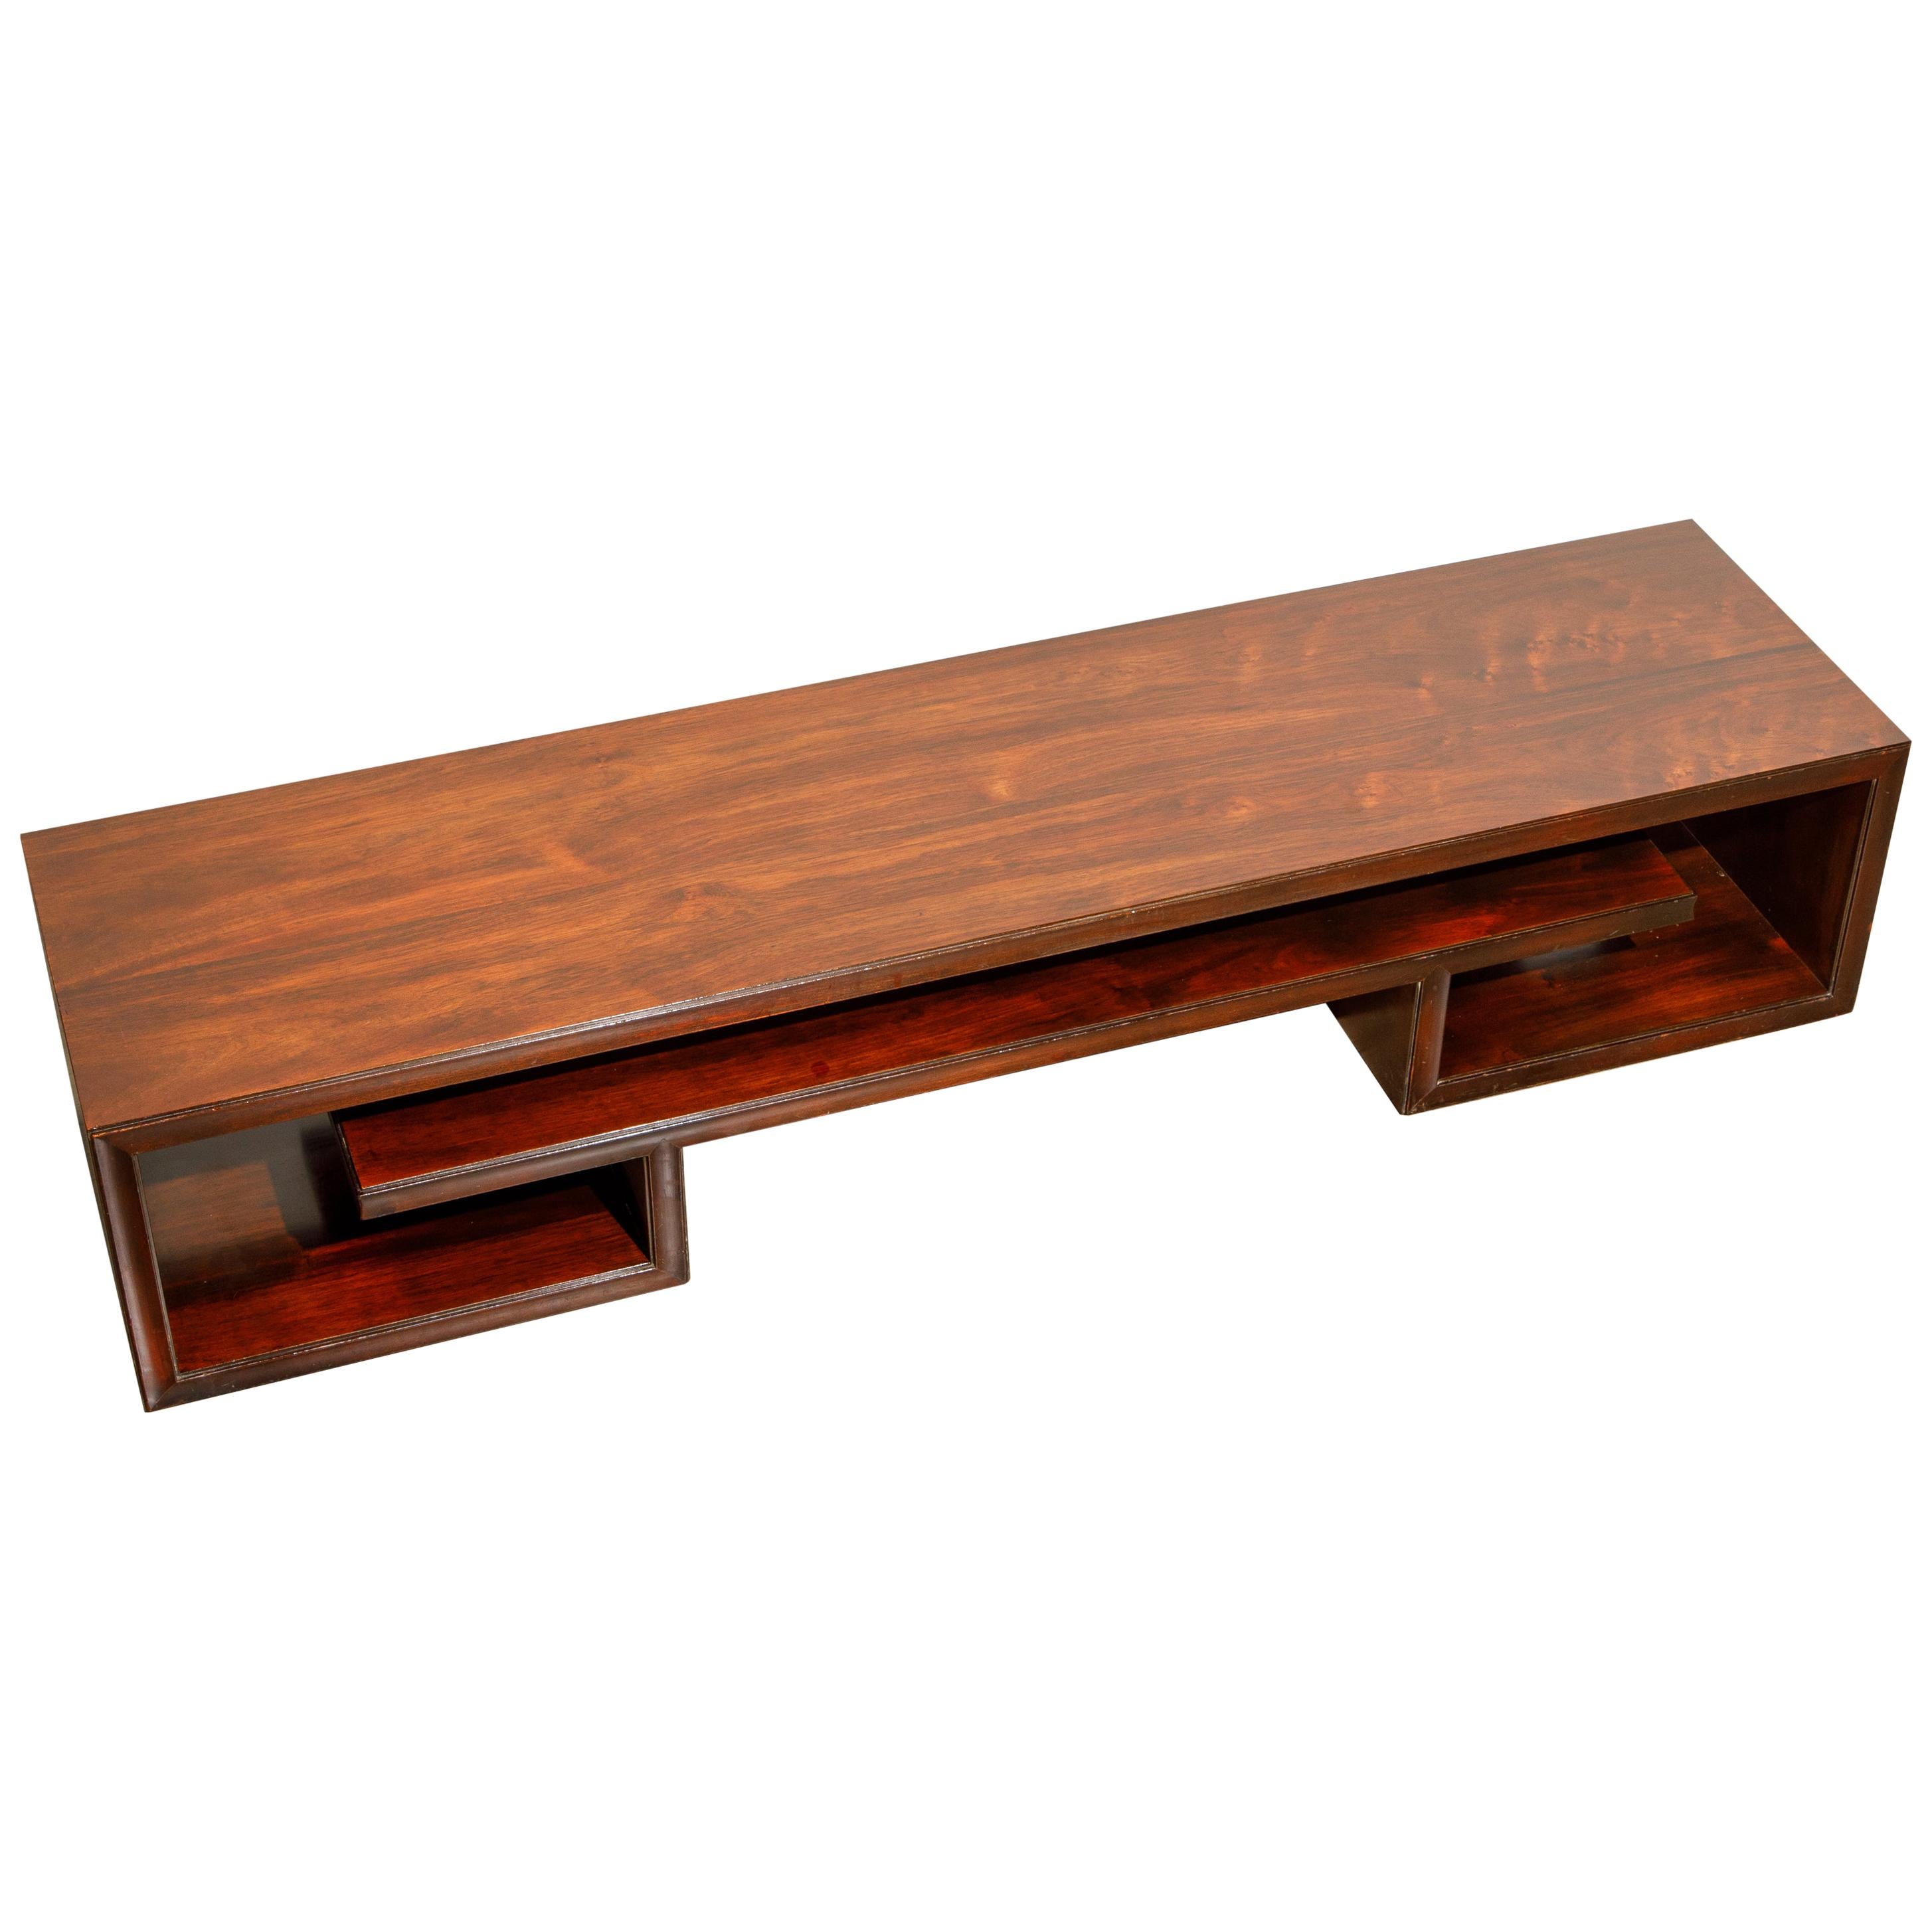 Paul Frankl for Johnson Furniture Rosewood Coffee Table, c. 1950s, Stamped